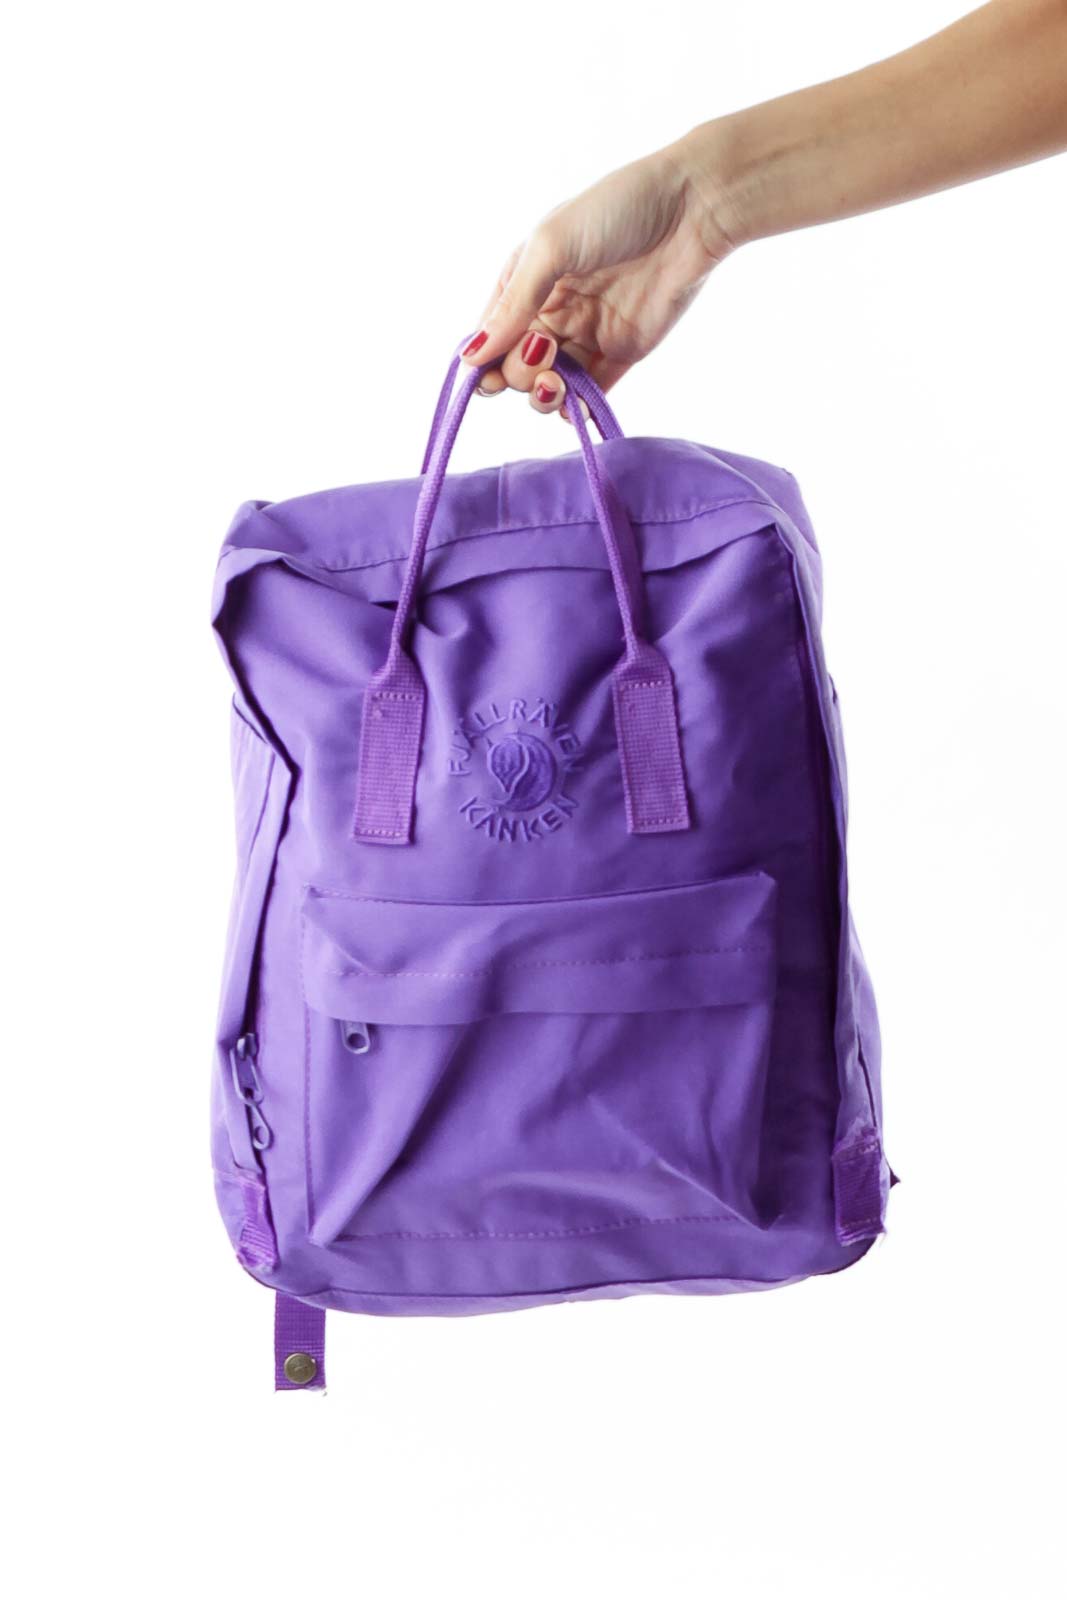 Purple Square Backpack with Pockets Front